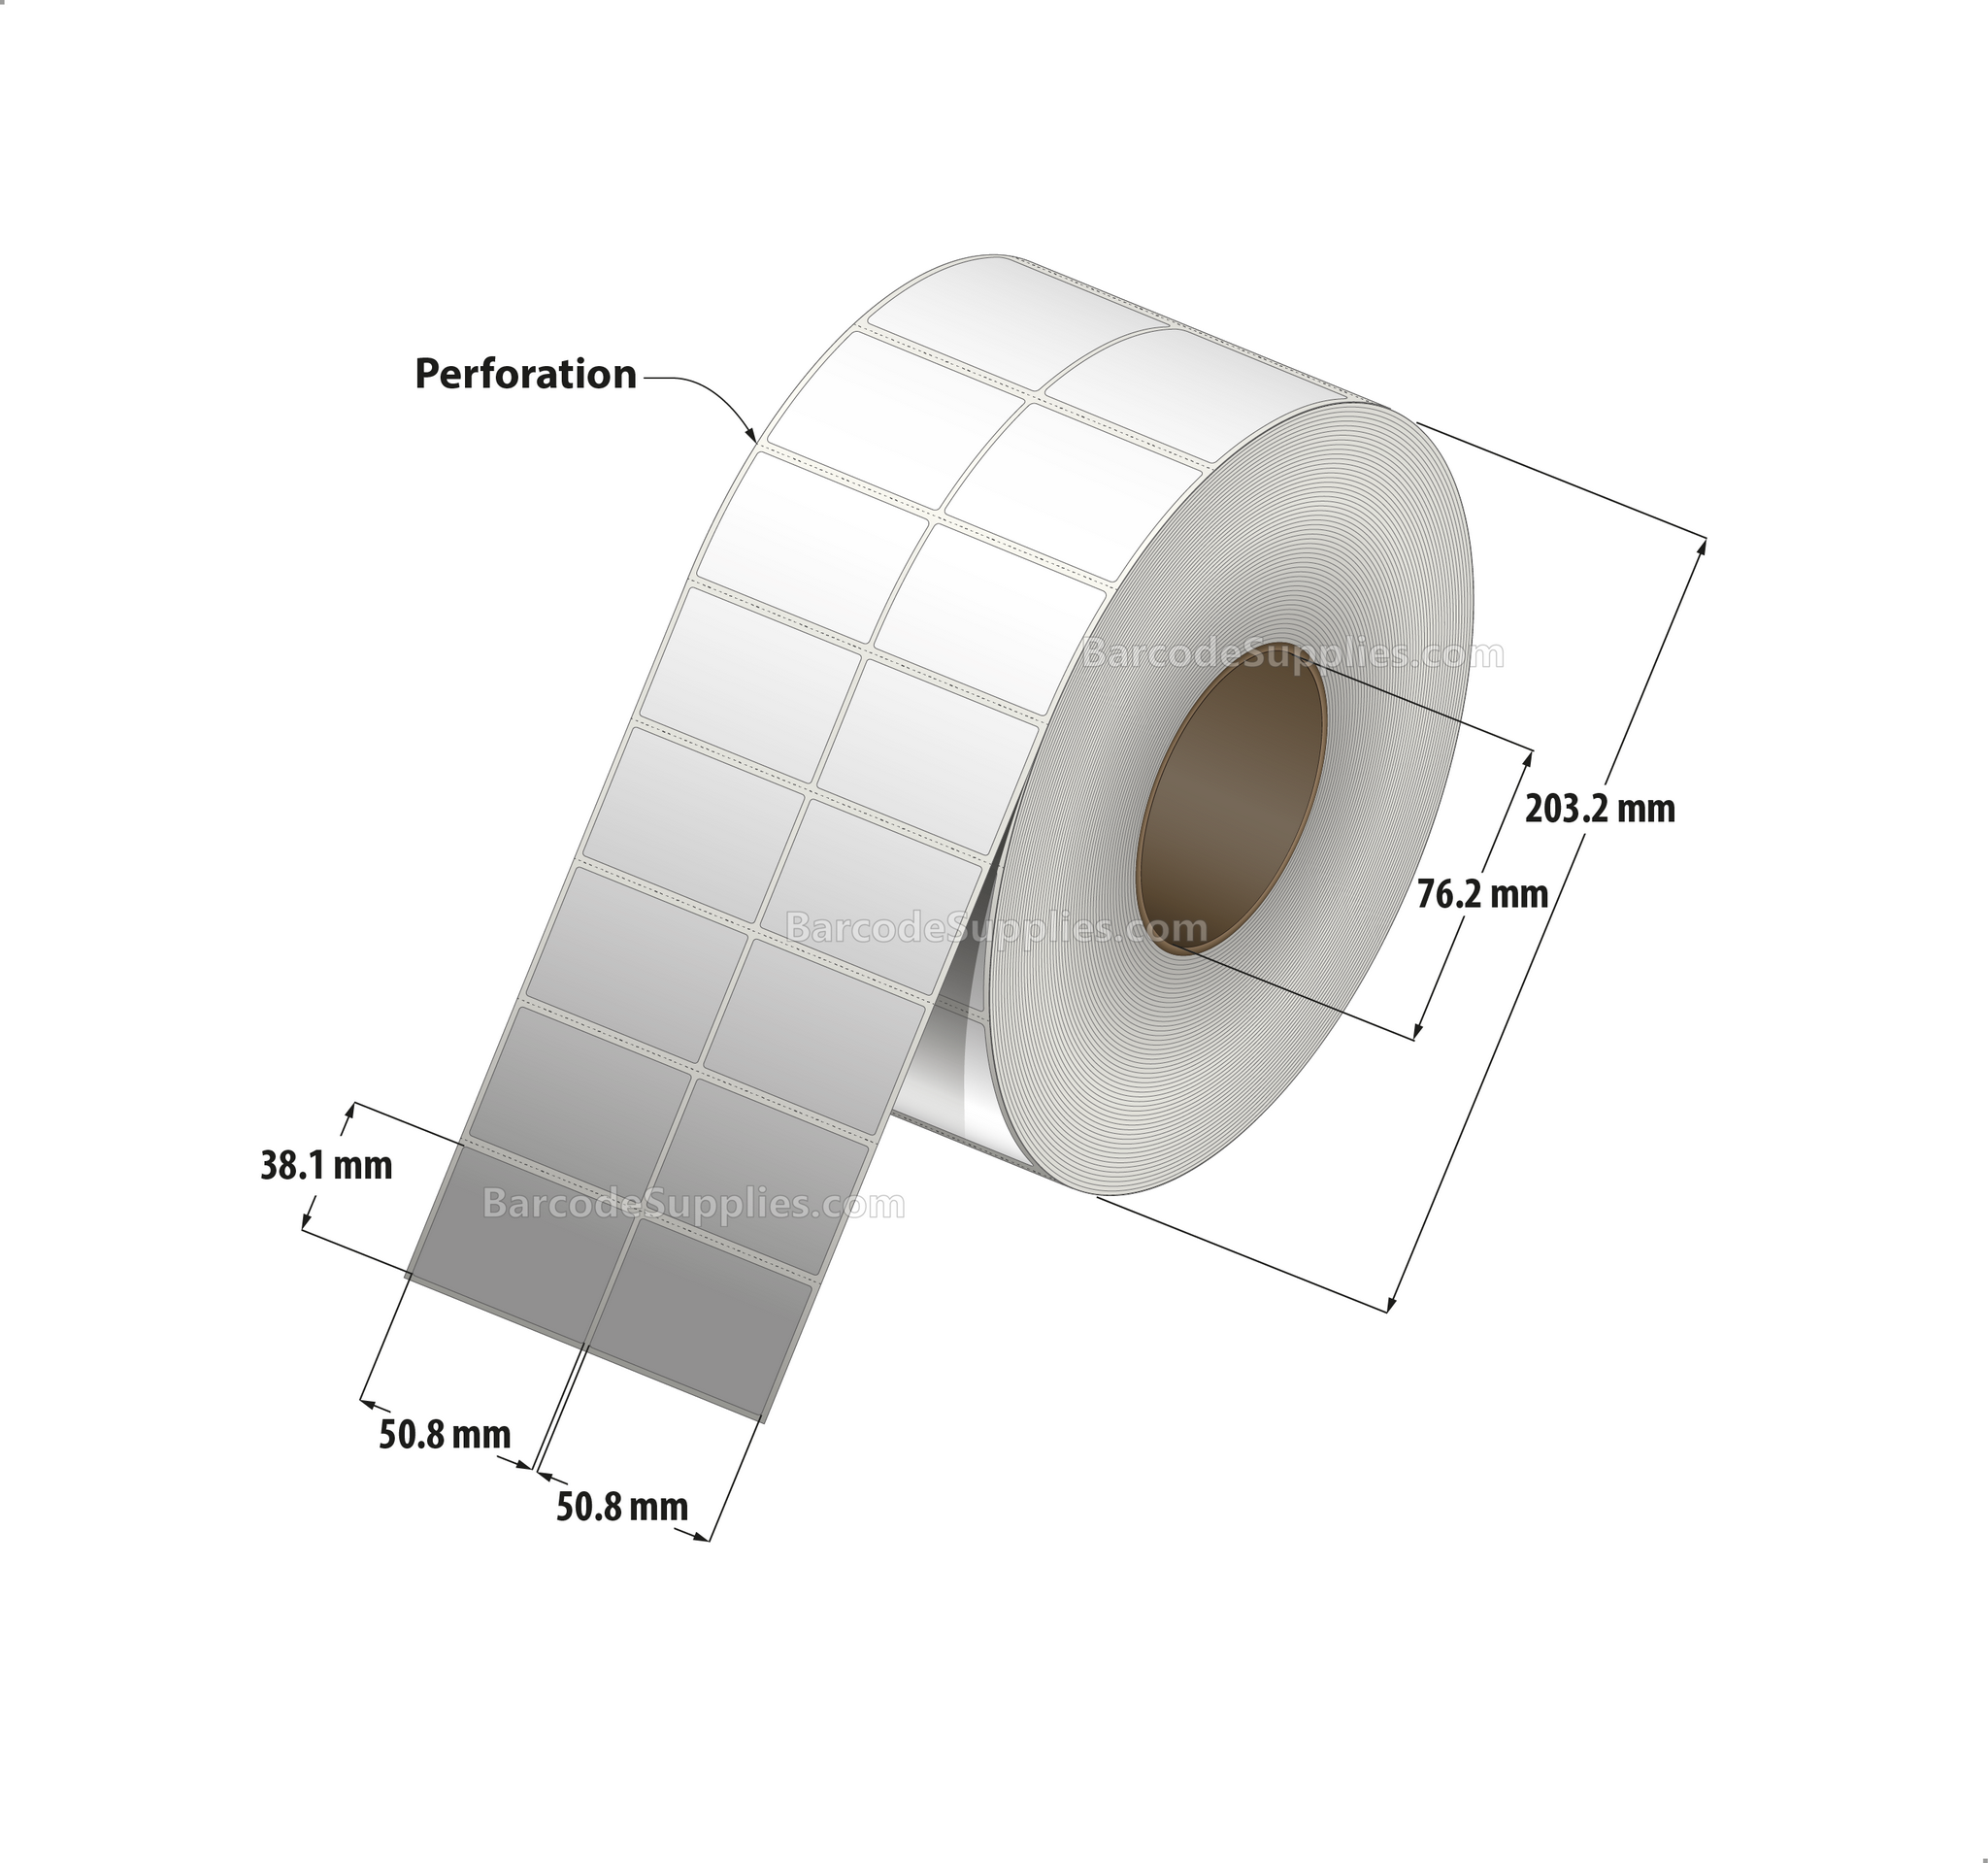 2 x 1.5 Thermal Transfer White Labels With Permanent Adhesive - Perforated - 7200 Labels Per Roll - Carton Of 4 Rolls - 28800 Labels Total - MPN: RT-2-15-7200-3